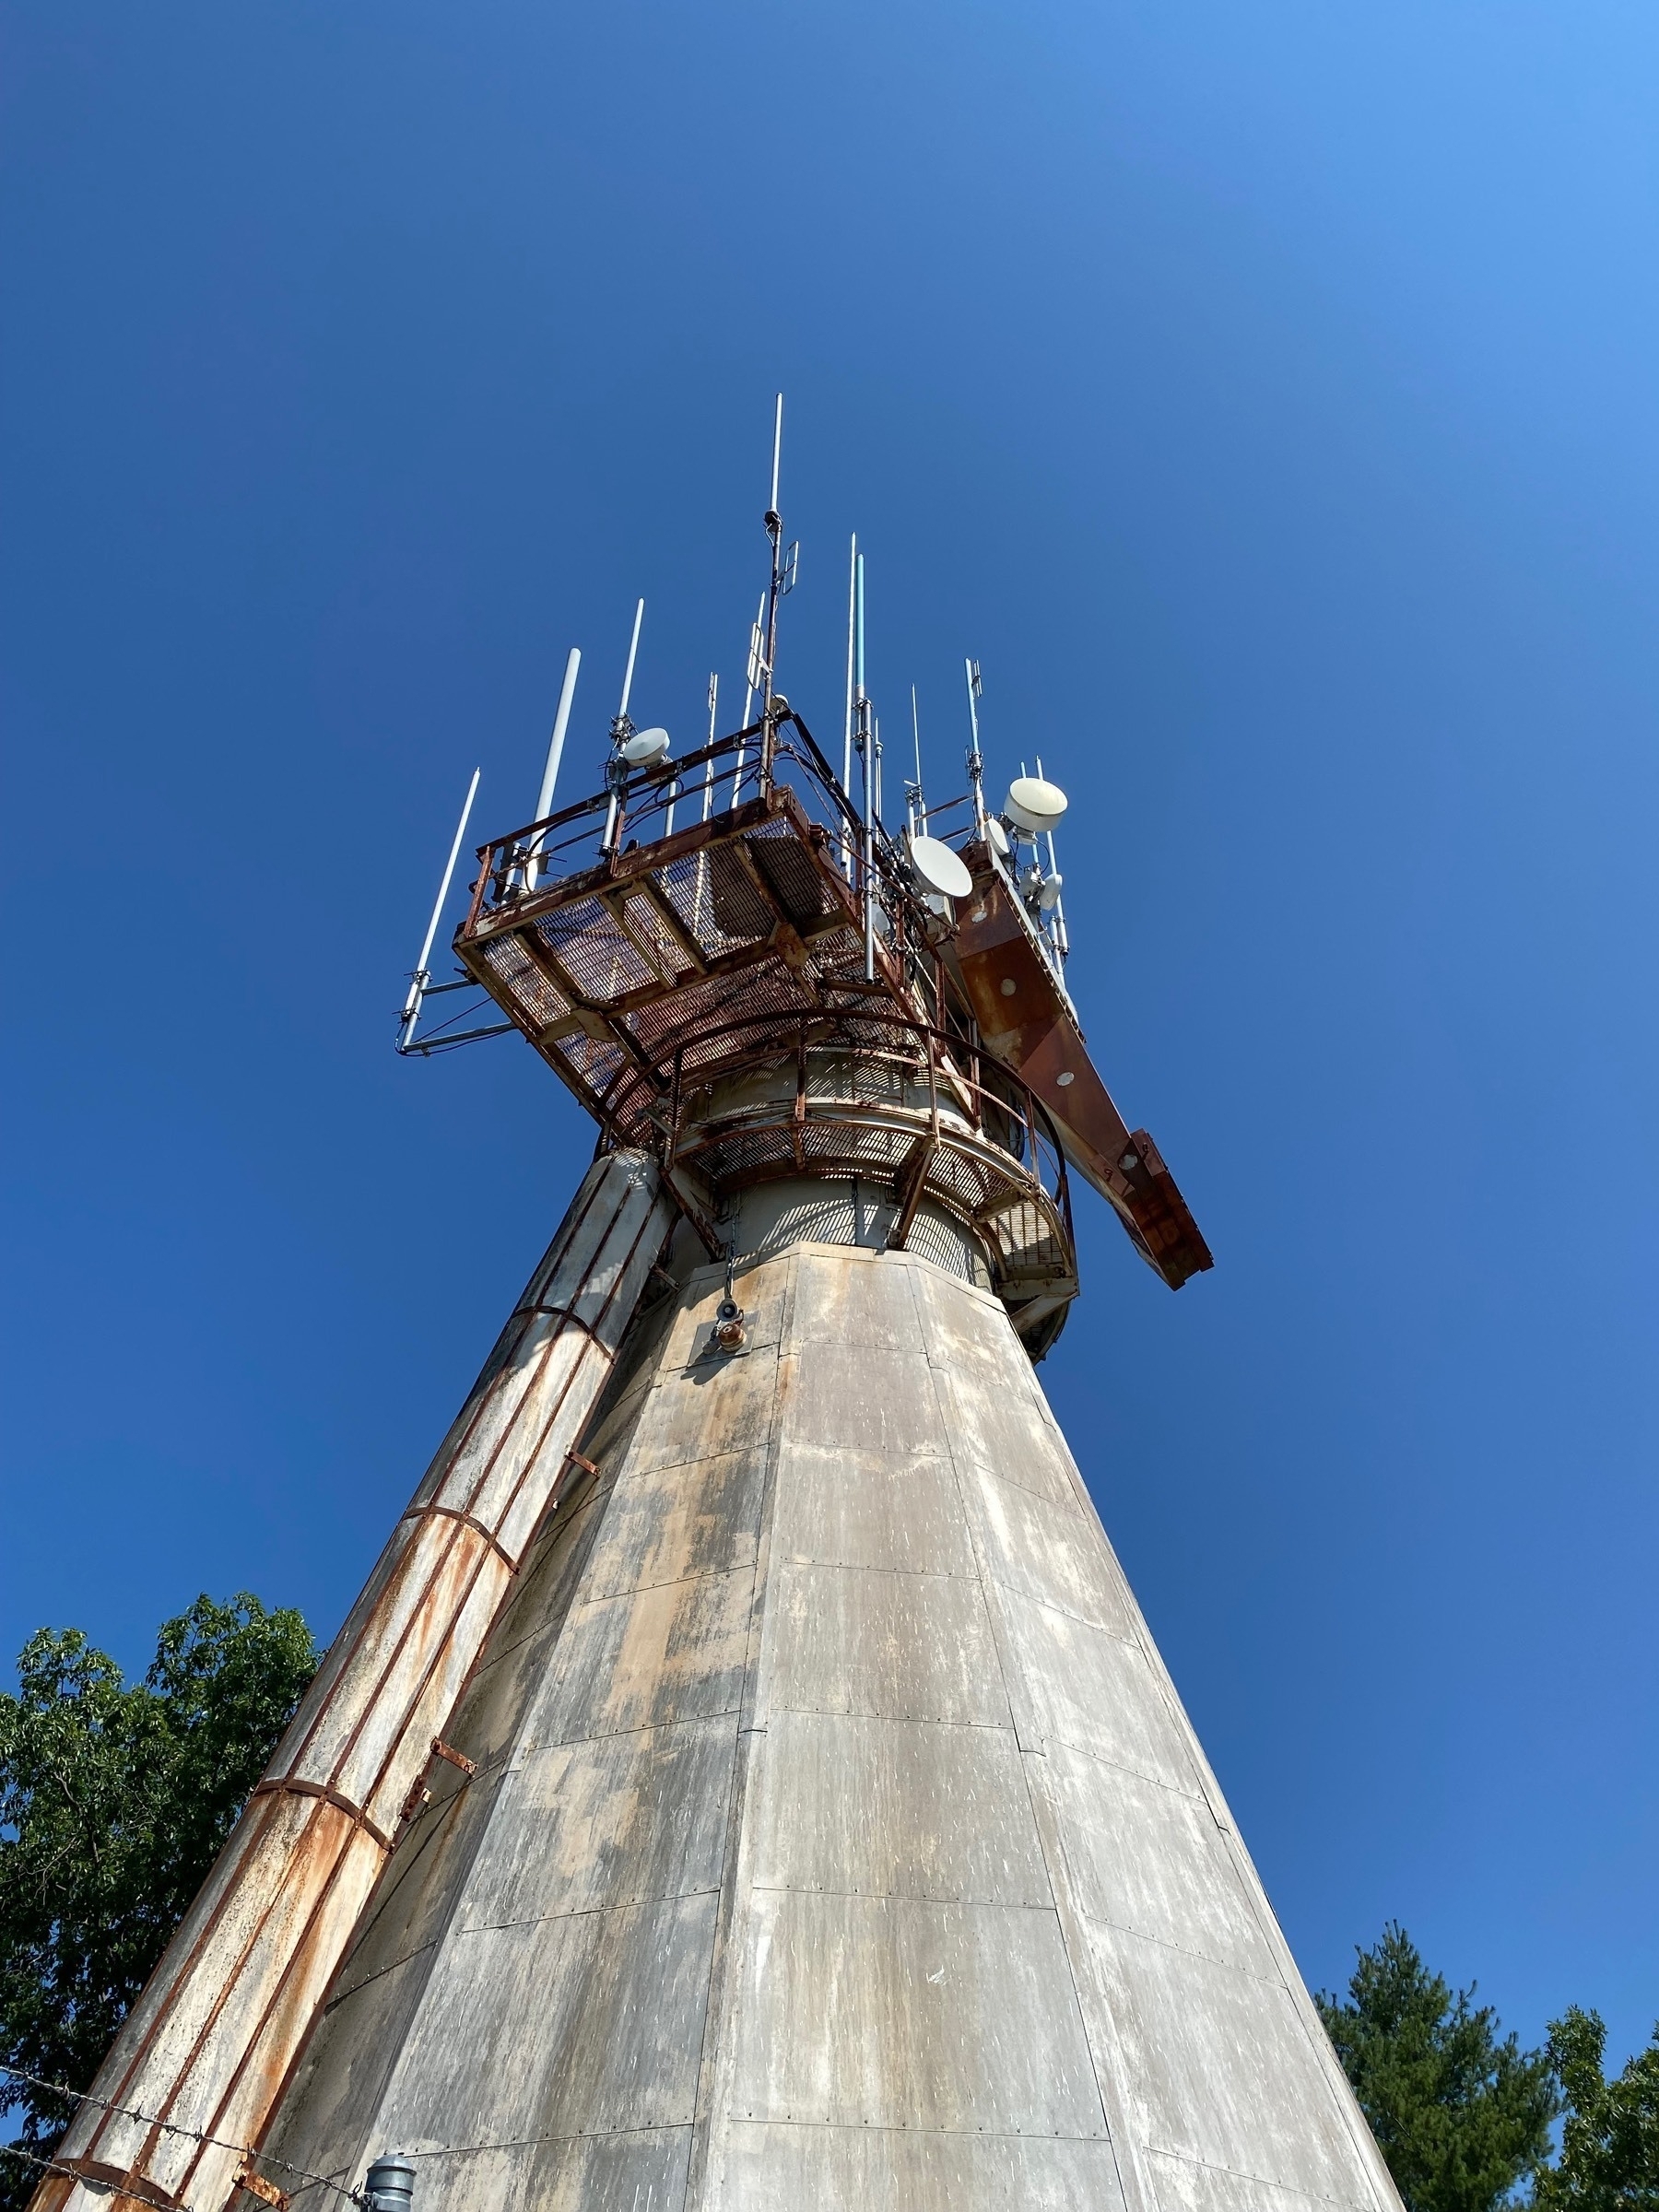 View up towards a cement tower with gantries and antennas at the top.